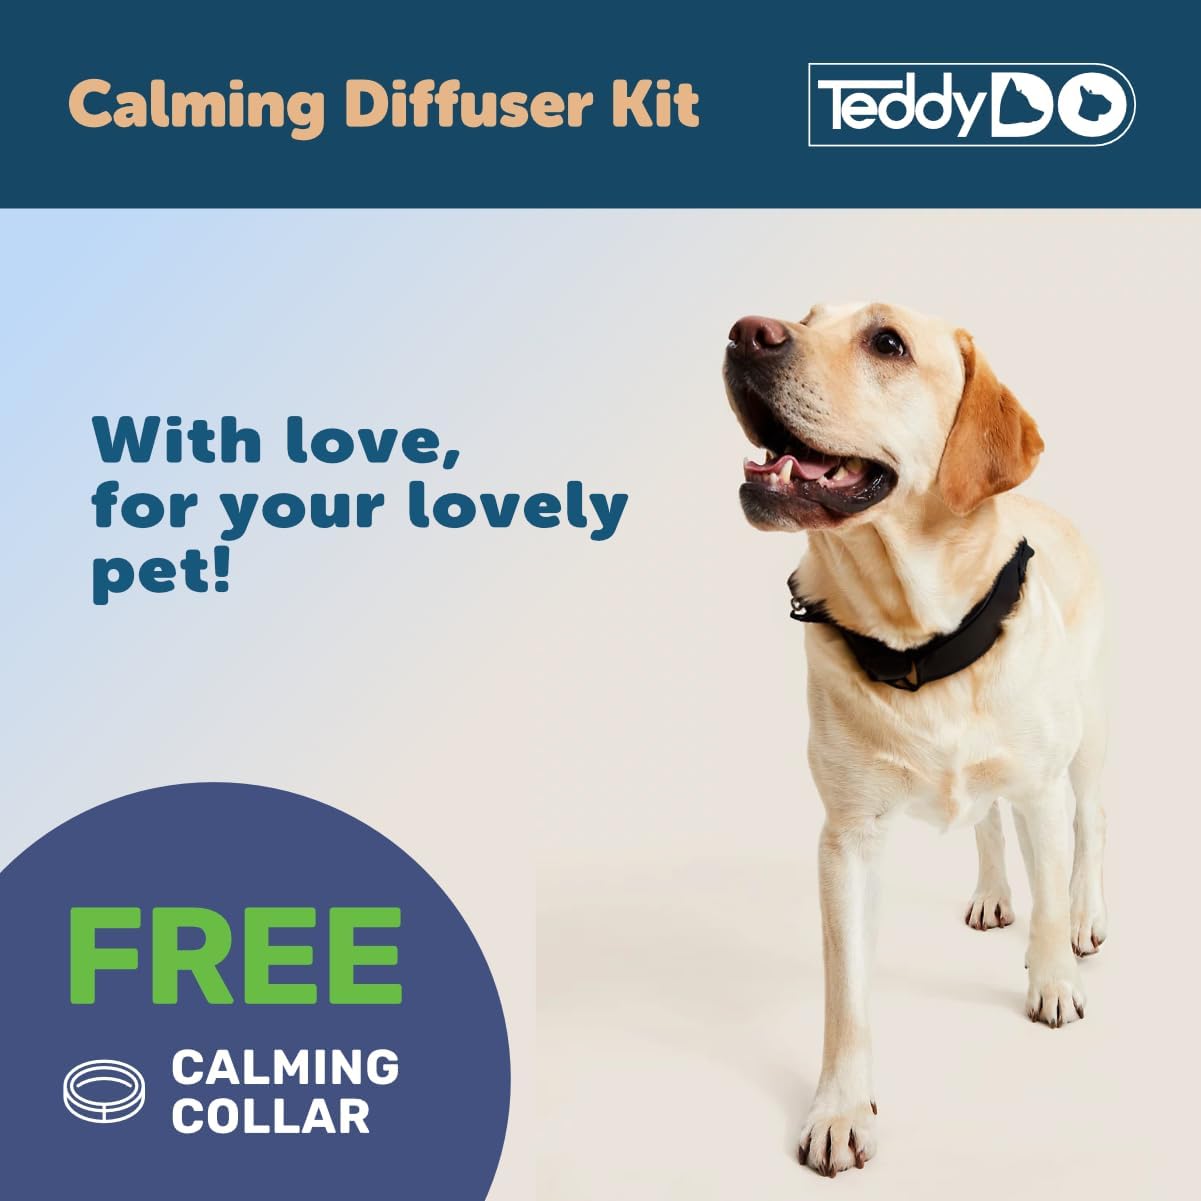 TeddyDo Calming Diffuser for Dogs | UK Plug In |Days Starter Kit | Free Calming Collar |Comfort, Calming and Relax Anxious Dog and Other Problematic Behaviors| 48 ml :Pet Supplies